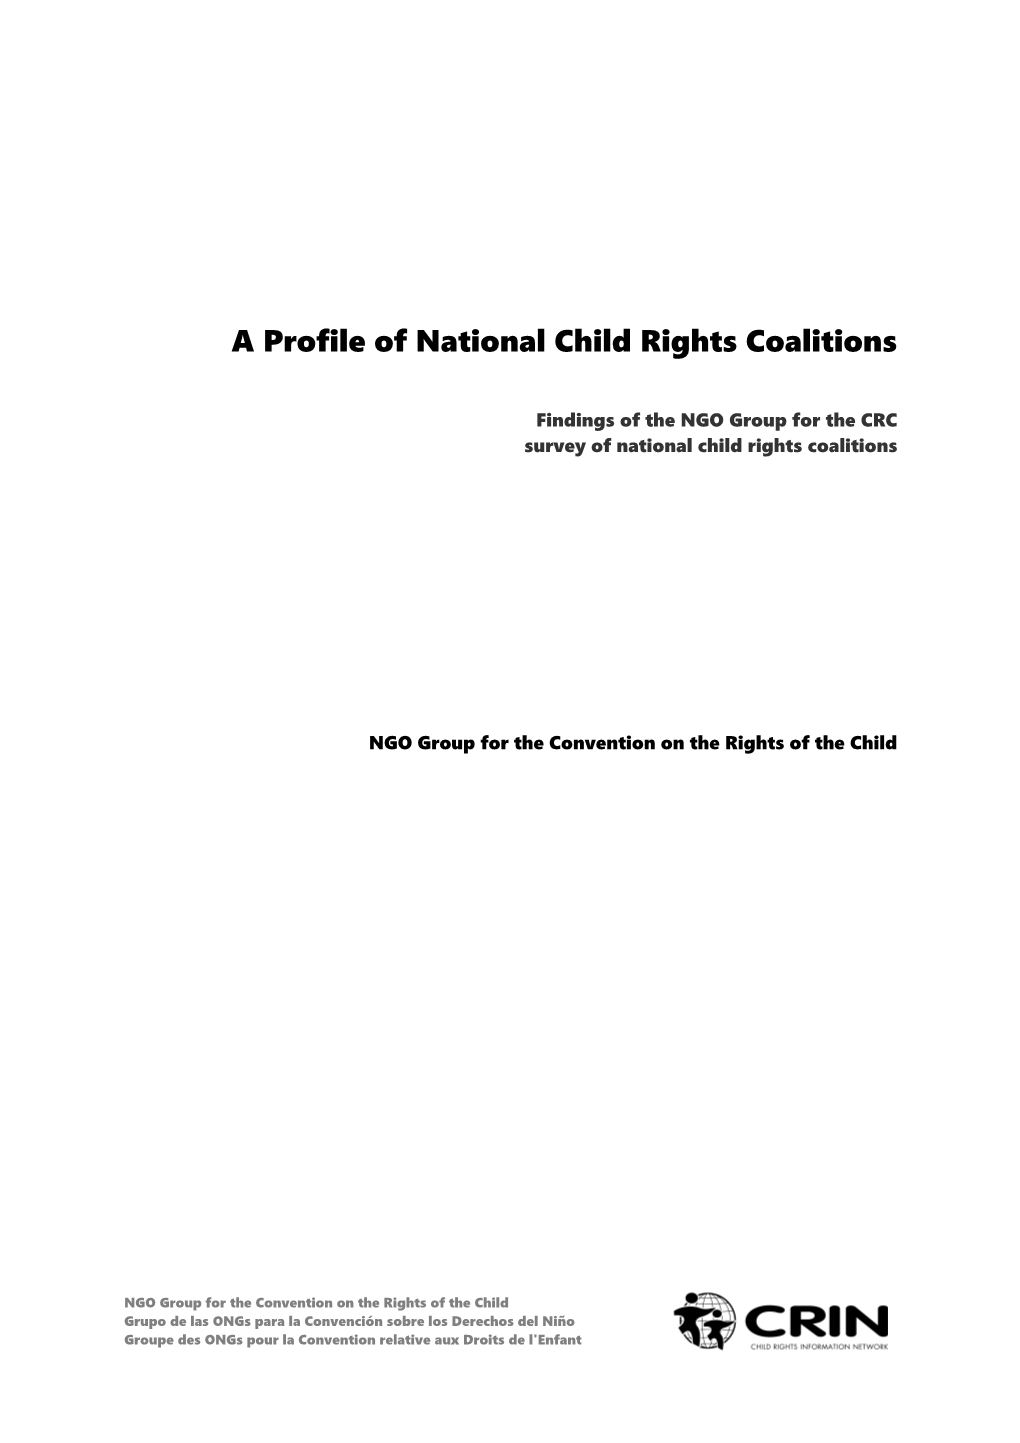 A Profile of National Child Rights Coalitions